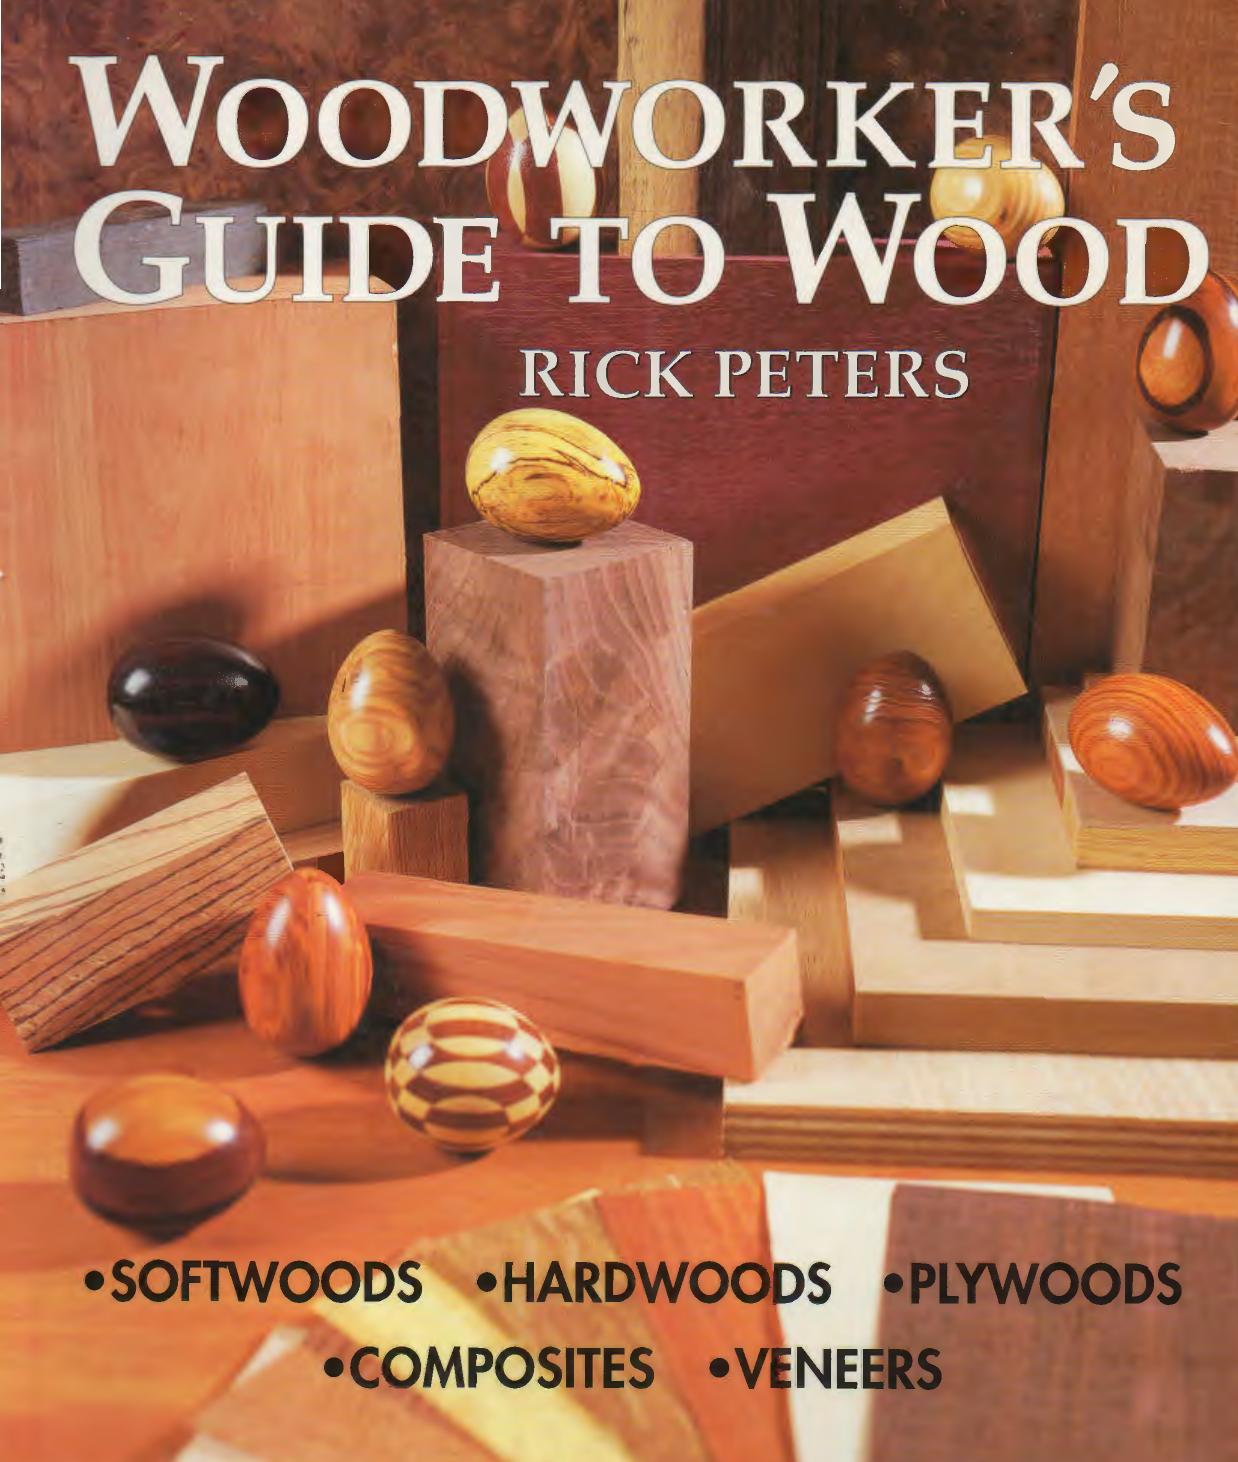 Woodworker's Guide to Wood Softwoods, Hardwoods, Plywoods, Composites,   2000